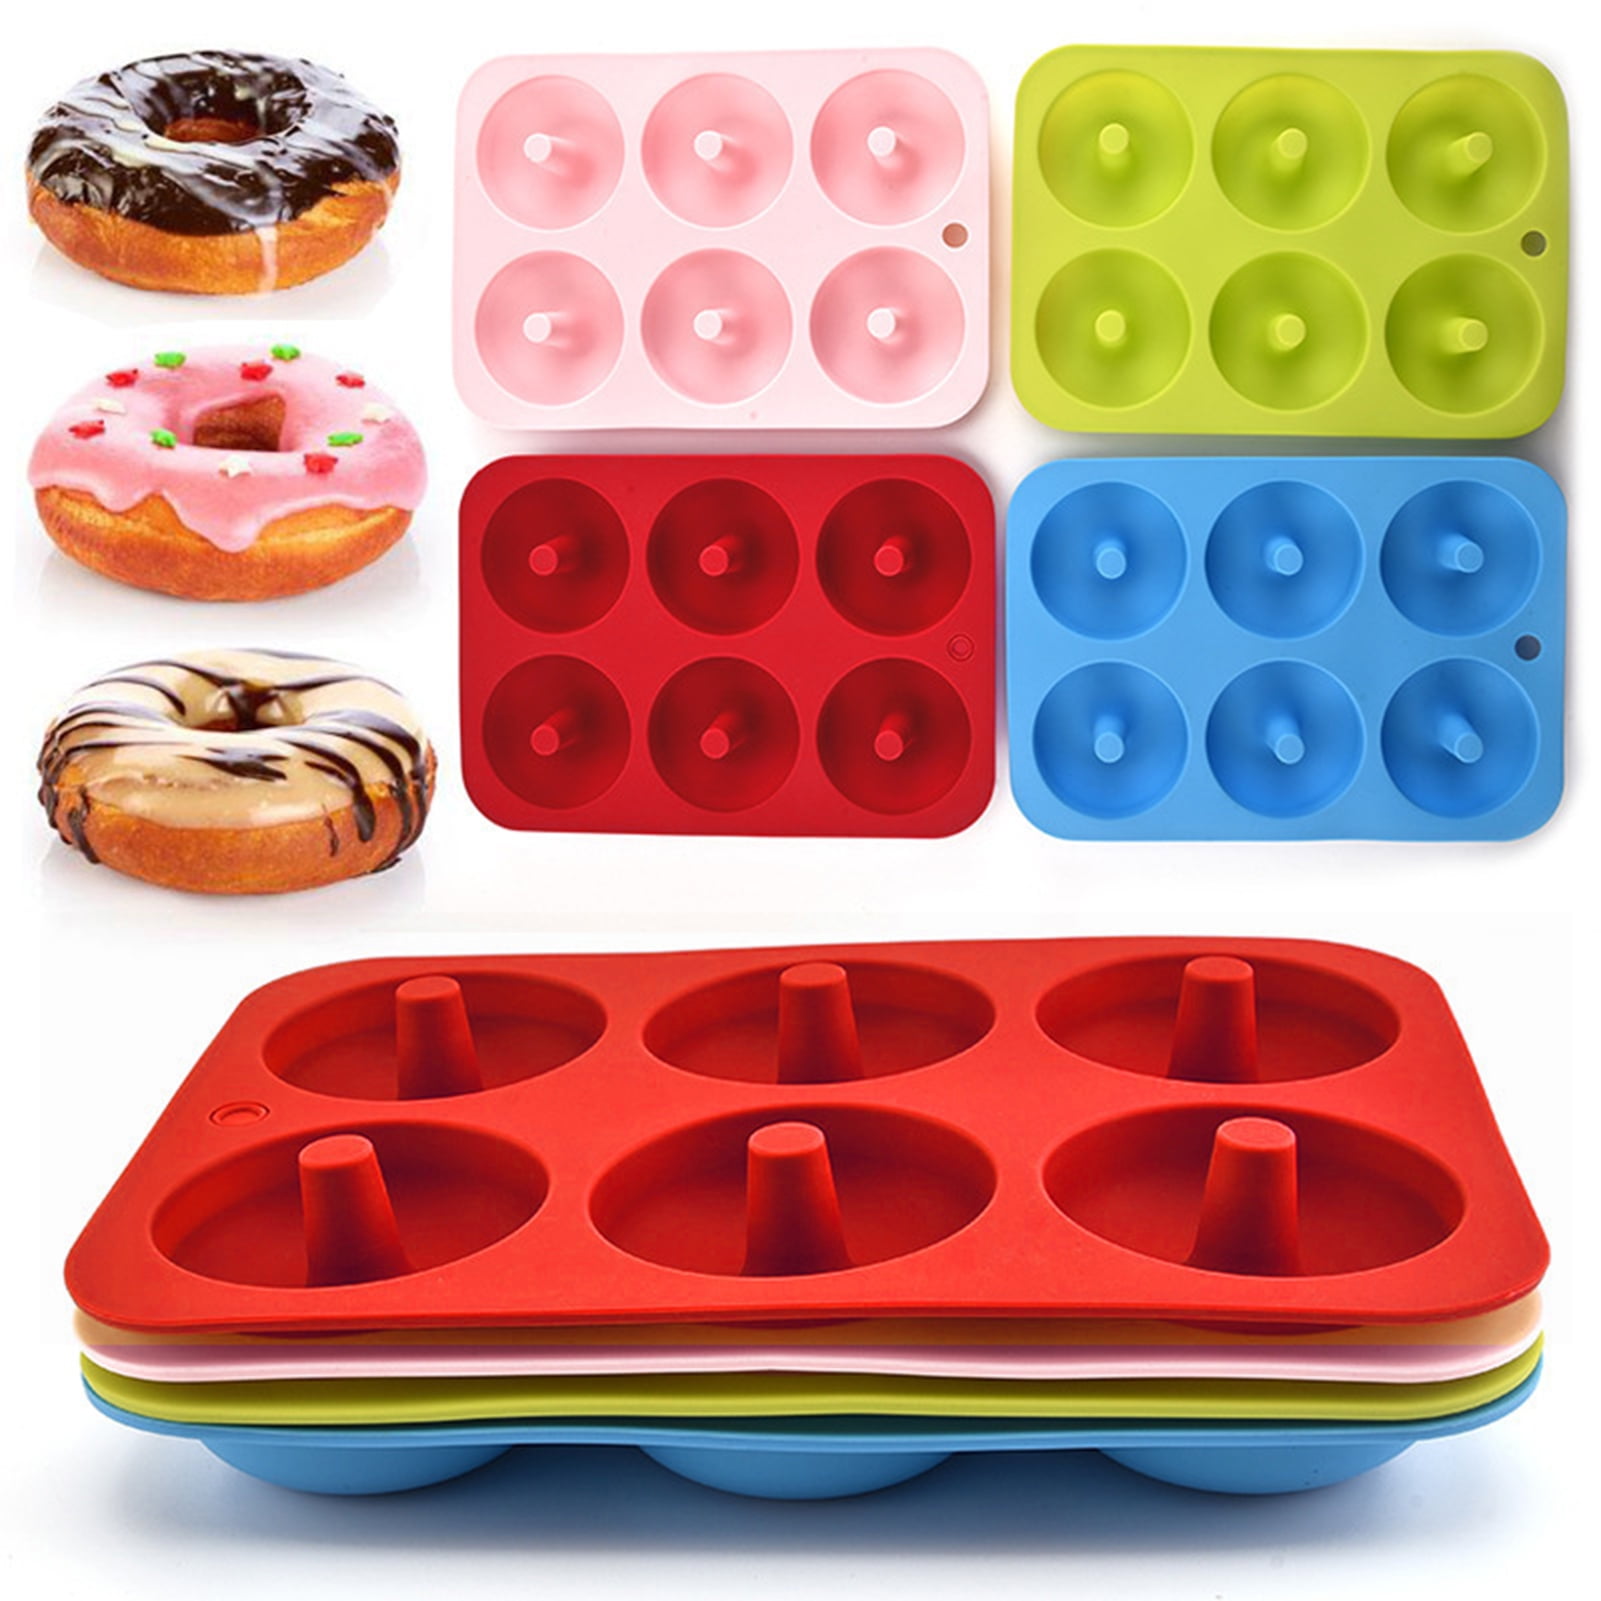 Gezan 3-Pack Silicone Donut Mold of 100% Nonstick Silicone. BPA Free Mold  Sheet Tray. Makes Perfect 3 Inch Donuts. Tray Measures 10x7 Inches. Easy